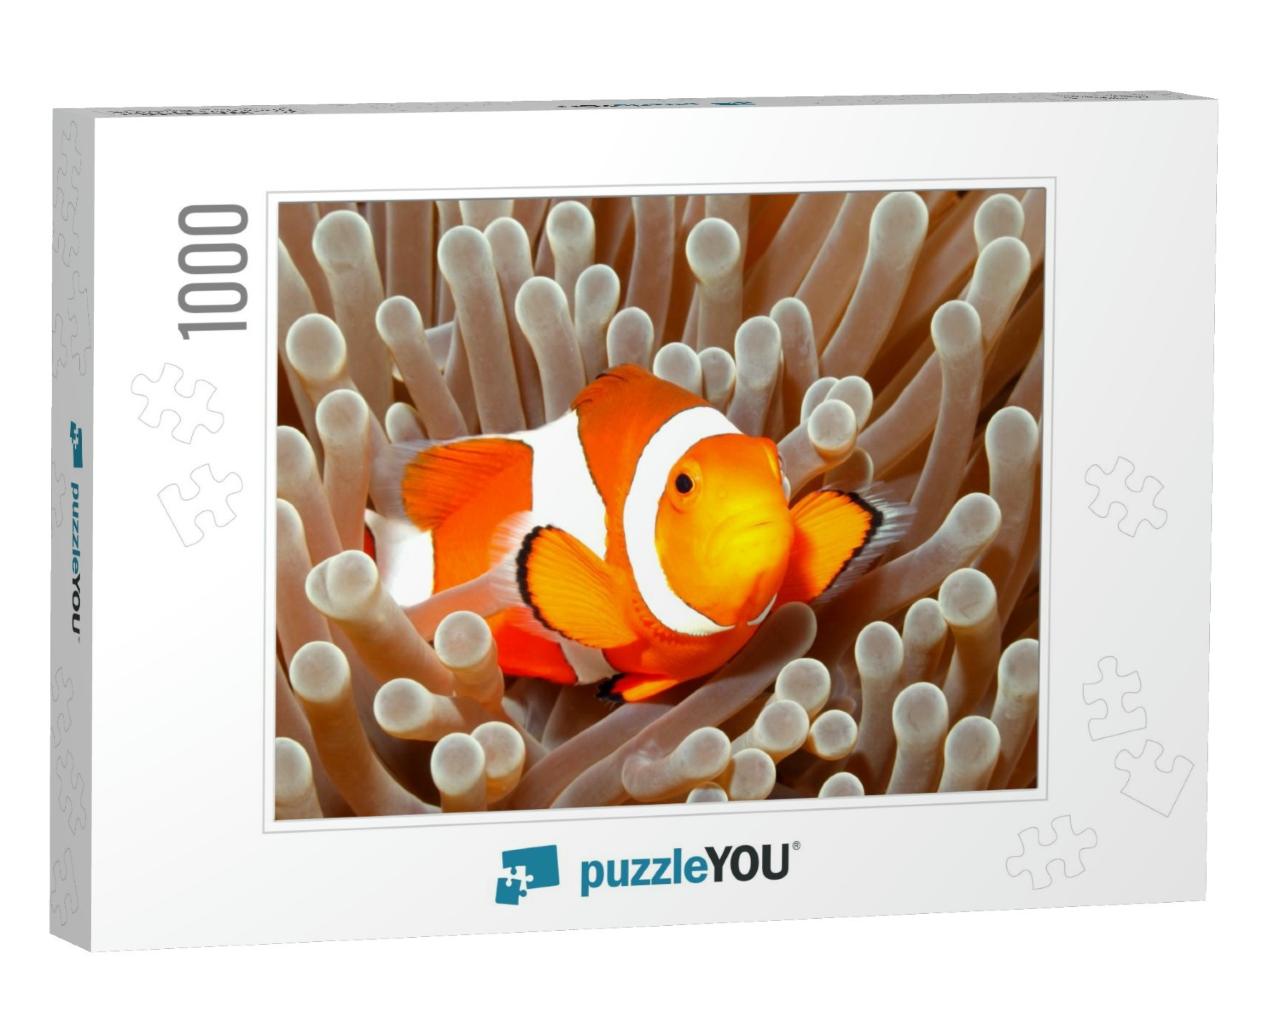 Clown Anemonefish, Amphiprion Percula, Swimming Among the... Jigsaw Puzzle with 1000 pieces